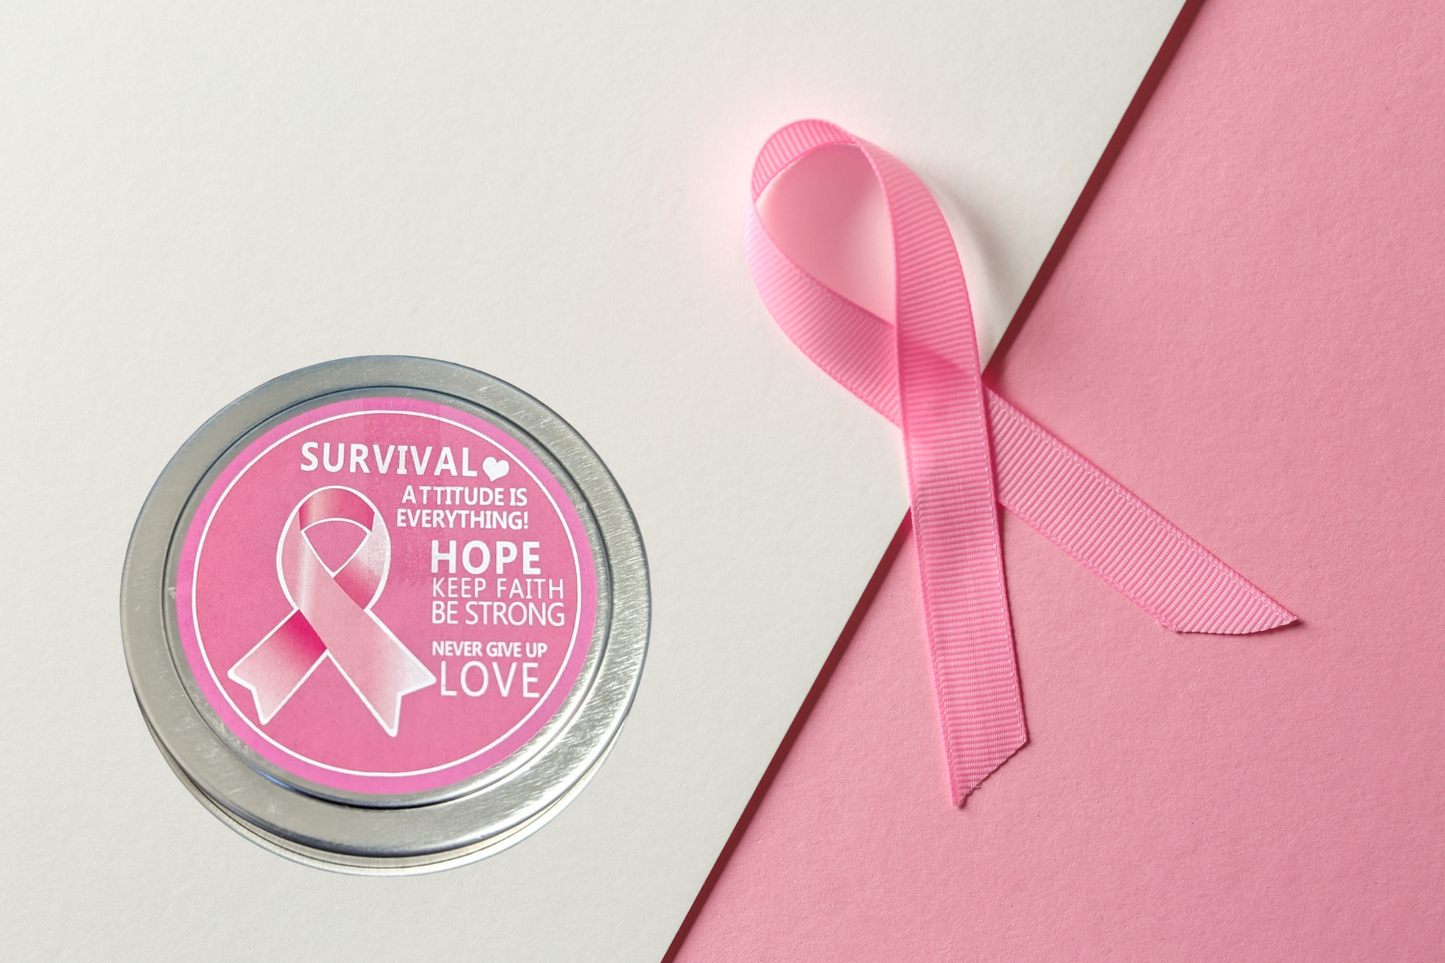 Breast cancer Awareness Gift Box - Hope for a warrior / a survivor / a mother - this is a support care pamper package -  Natural Lavender Bath & Body Relaxing Package